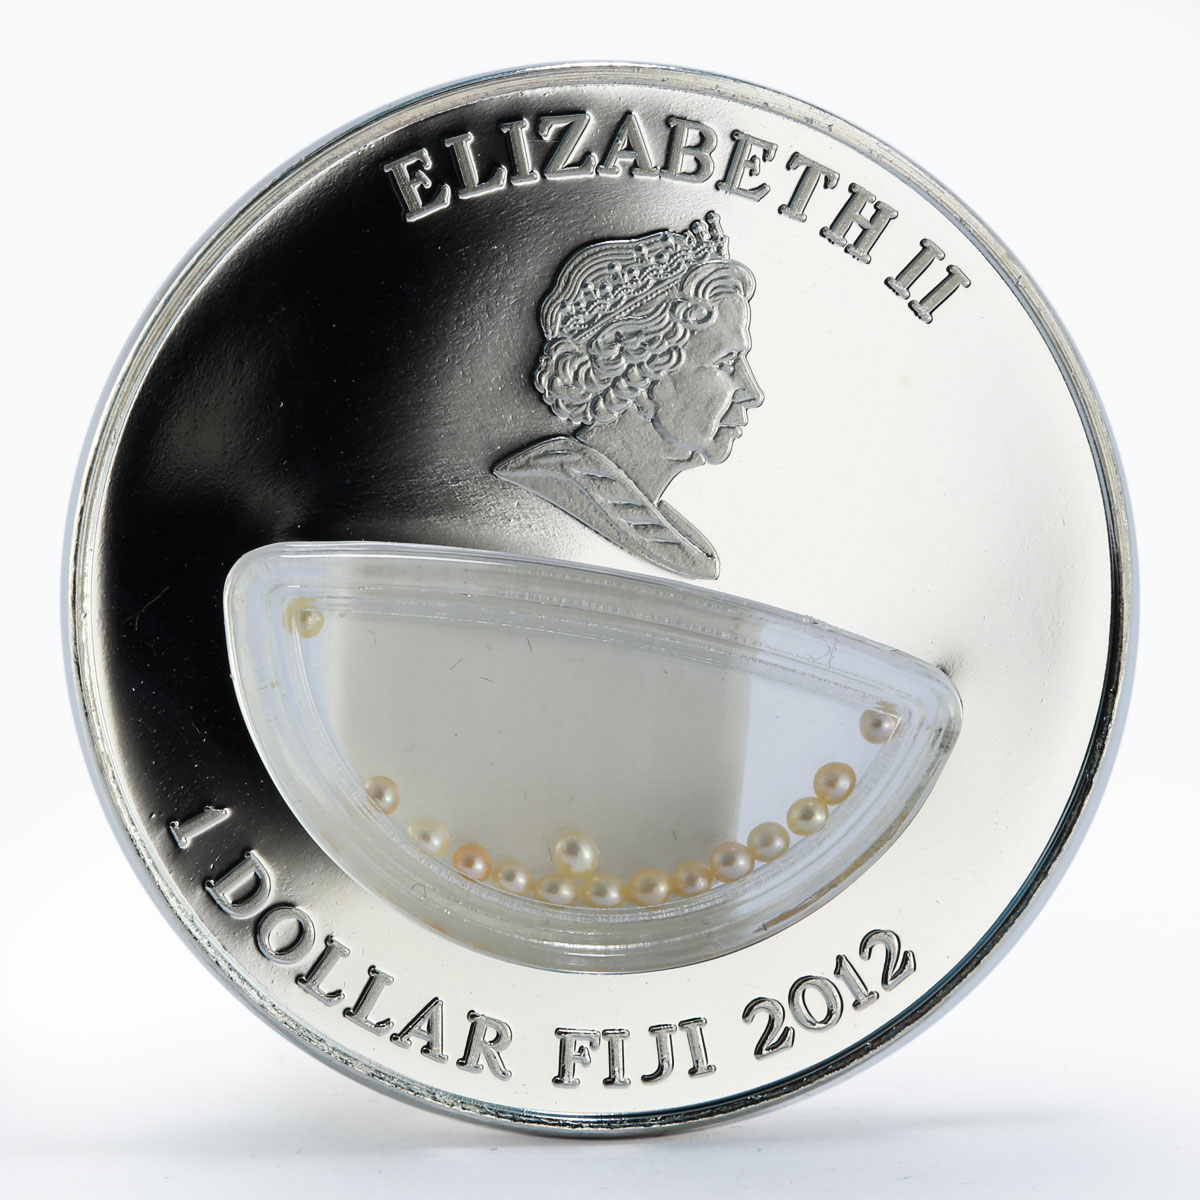 Fiji 1 dollar Treasures of Mother Nature Pink Pearl proof silver coin 2012